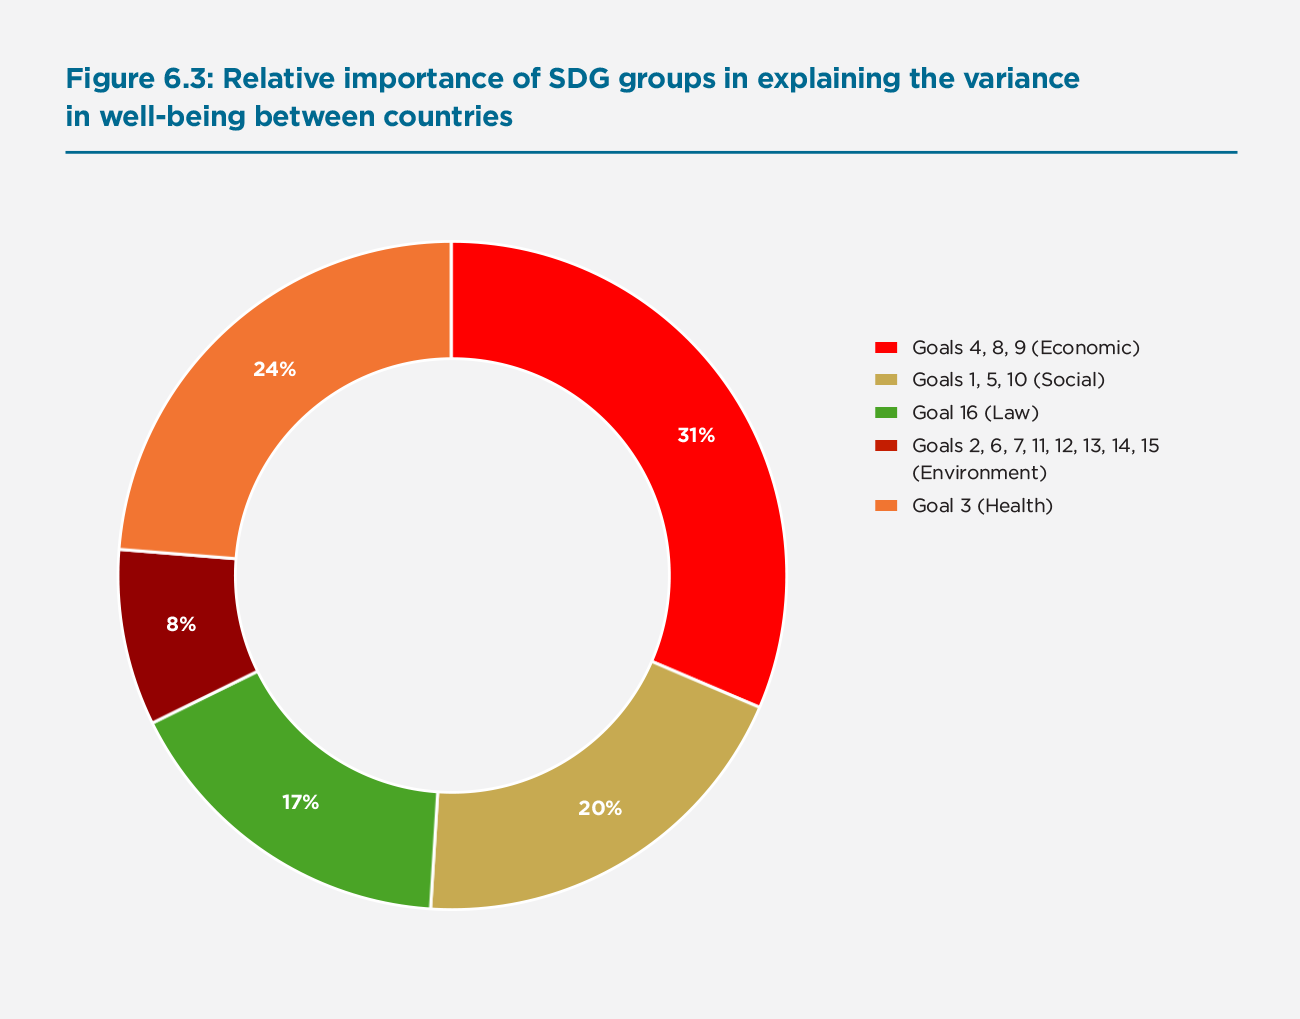 Figure 6.3: Relative importance of SDG groups in explaining the variance in well-being between countries